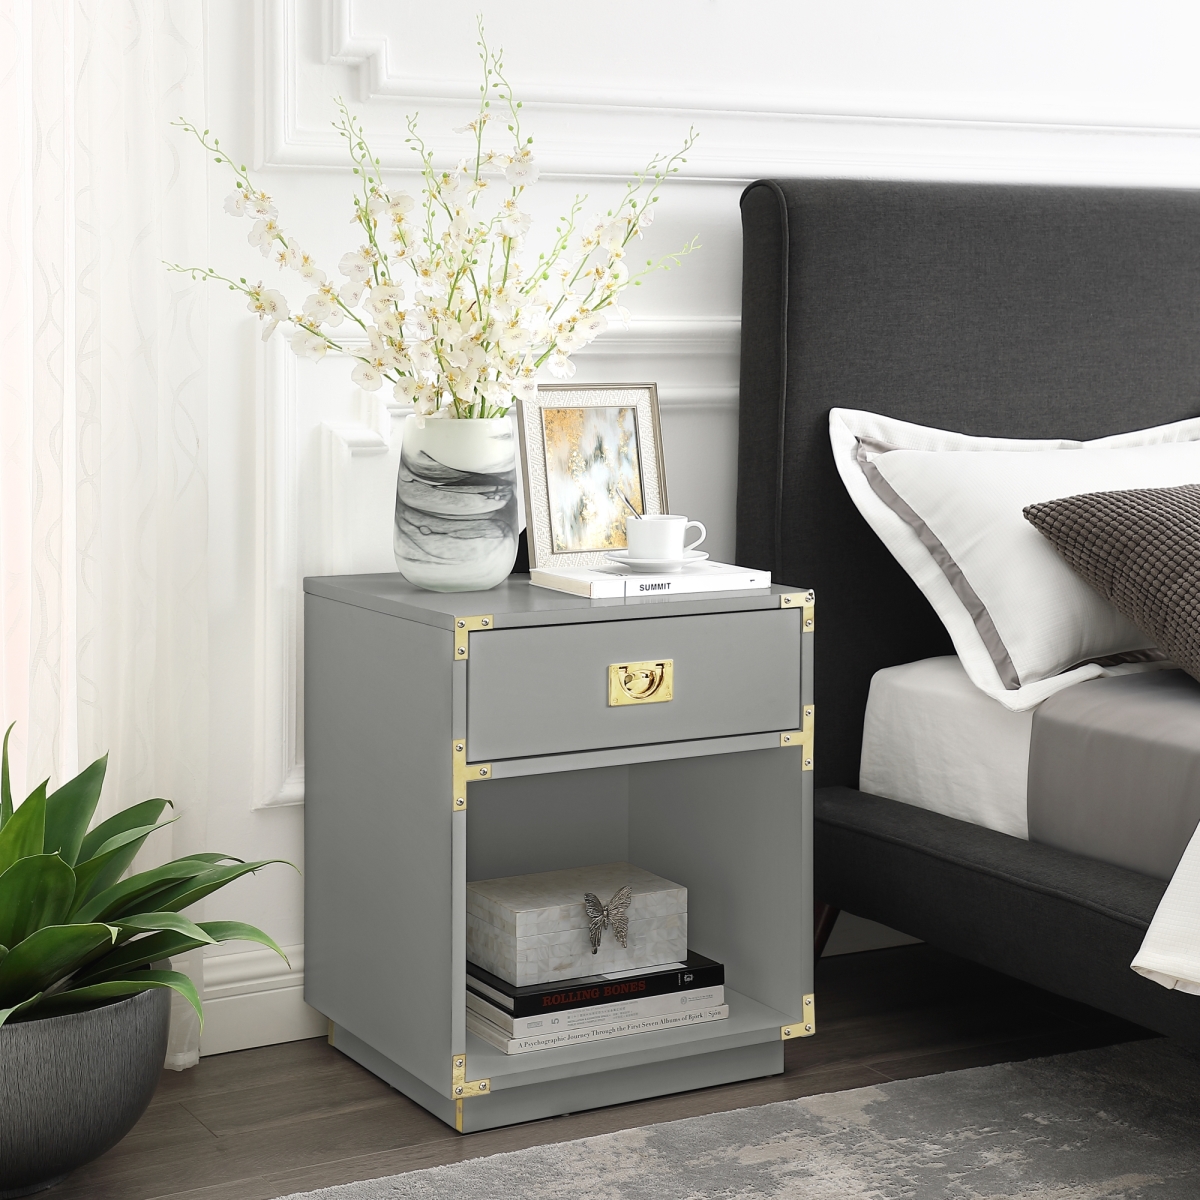 St154-09gg-ue Posh Living Angela Side Table, Accent Table & Nightstand, Light Grey - 20 X 18 X 24 In.